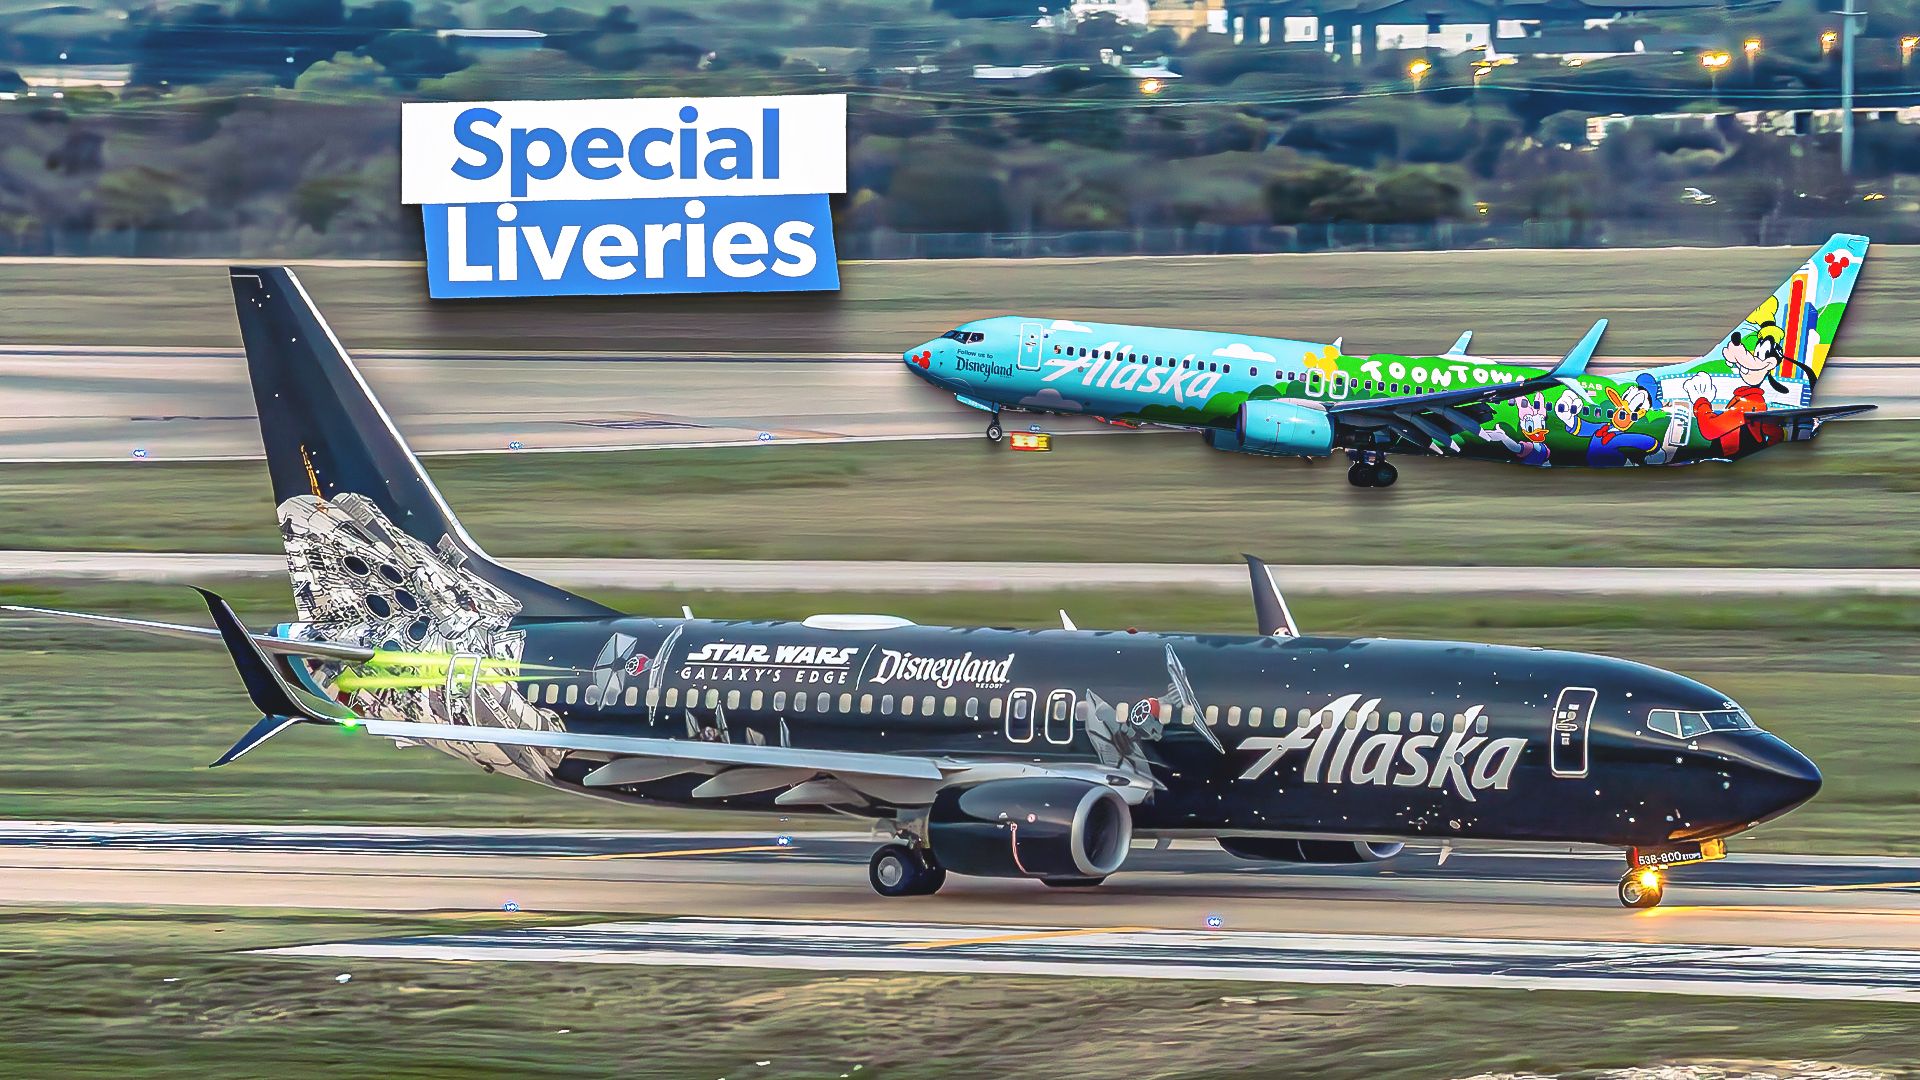 Special Liveries: 5 Unique Alaska Airlines Paint Schemes That Stand Out From The Crowd